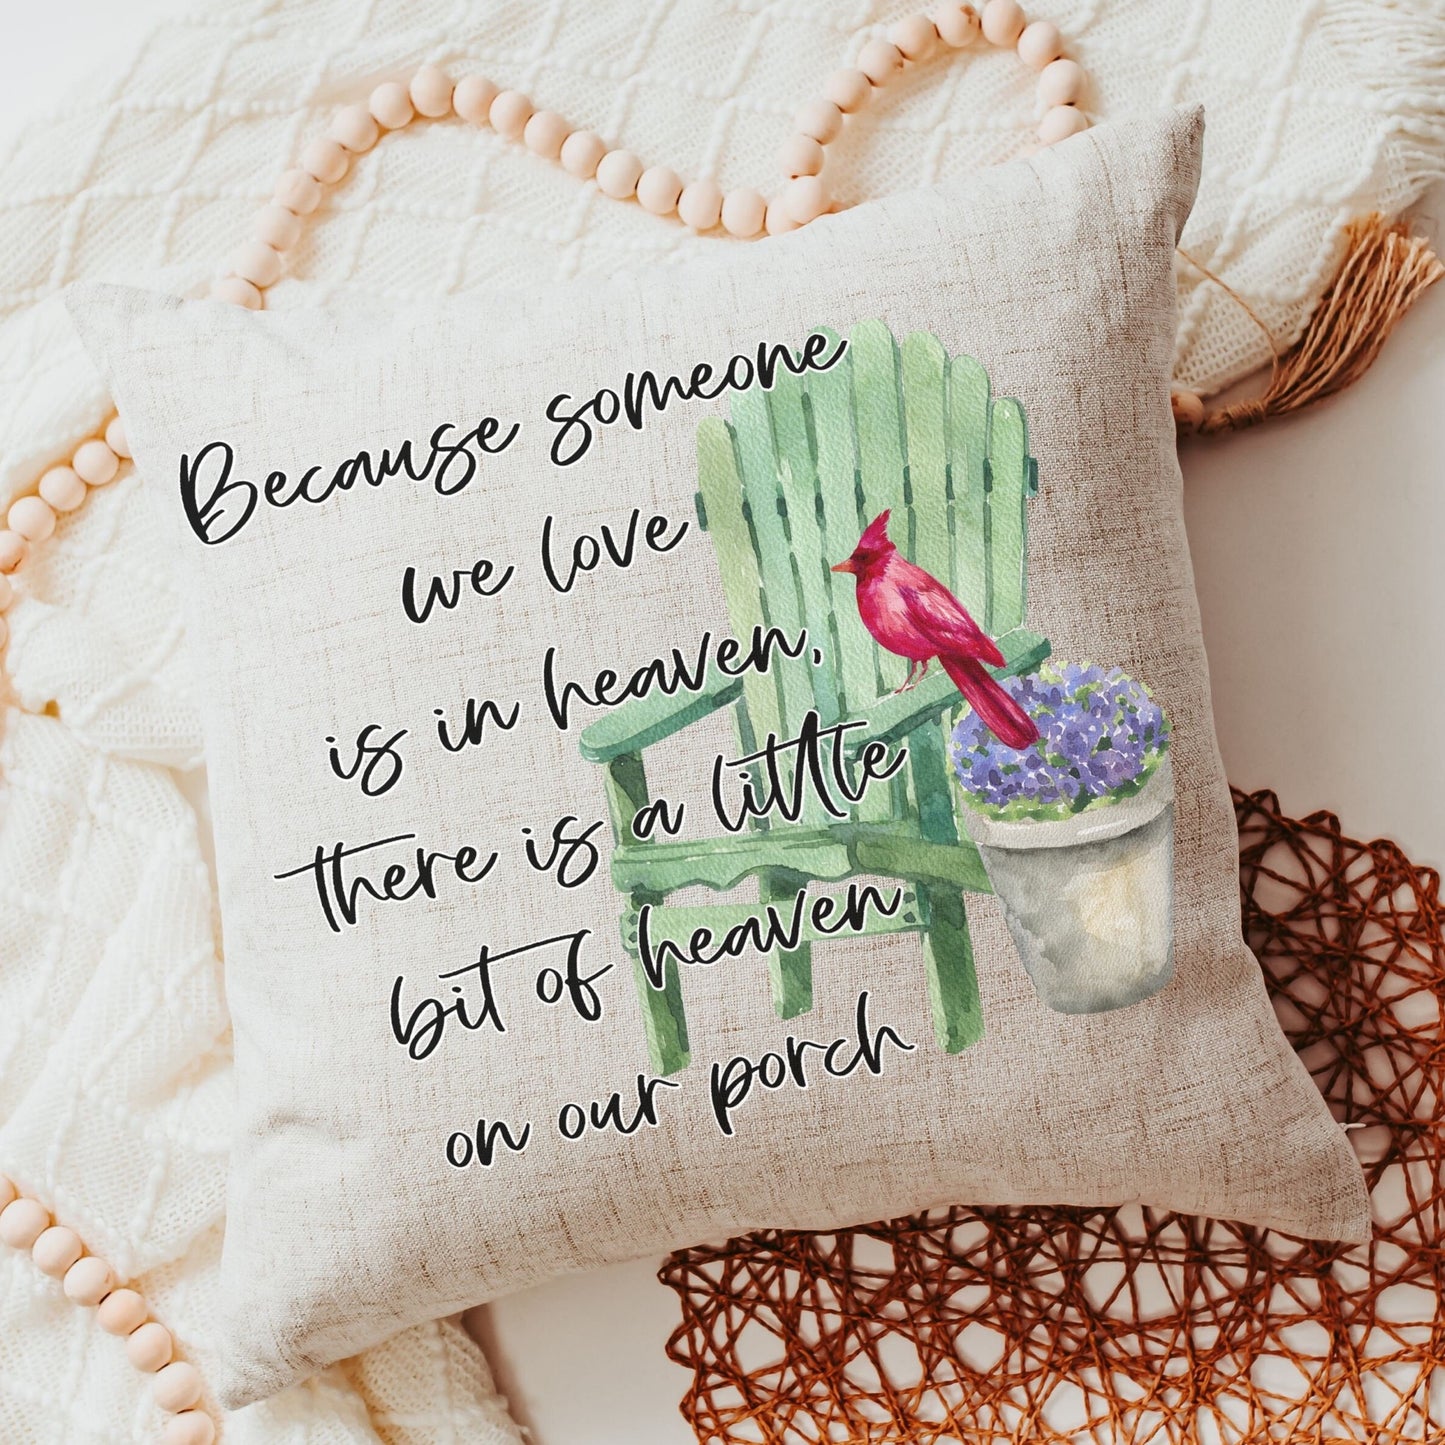 Someone We Love Is In Heaven Memorial Throw Pillow